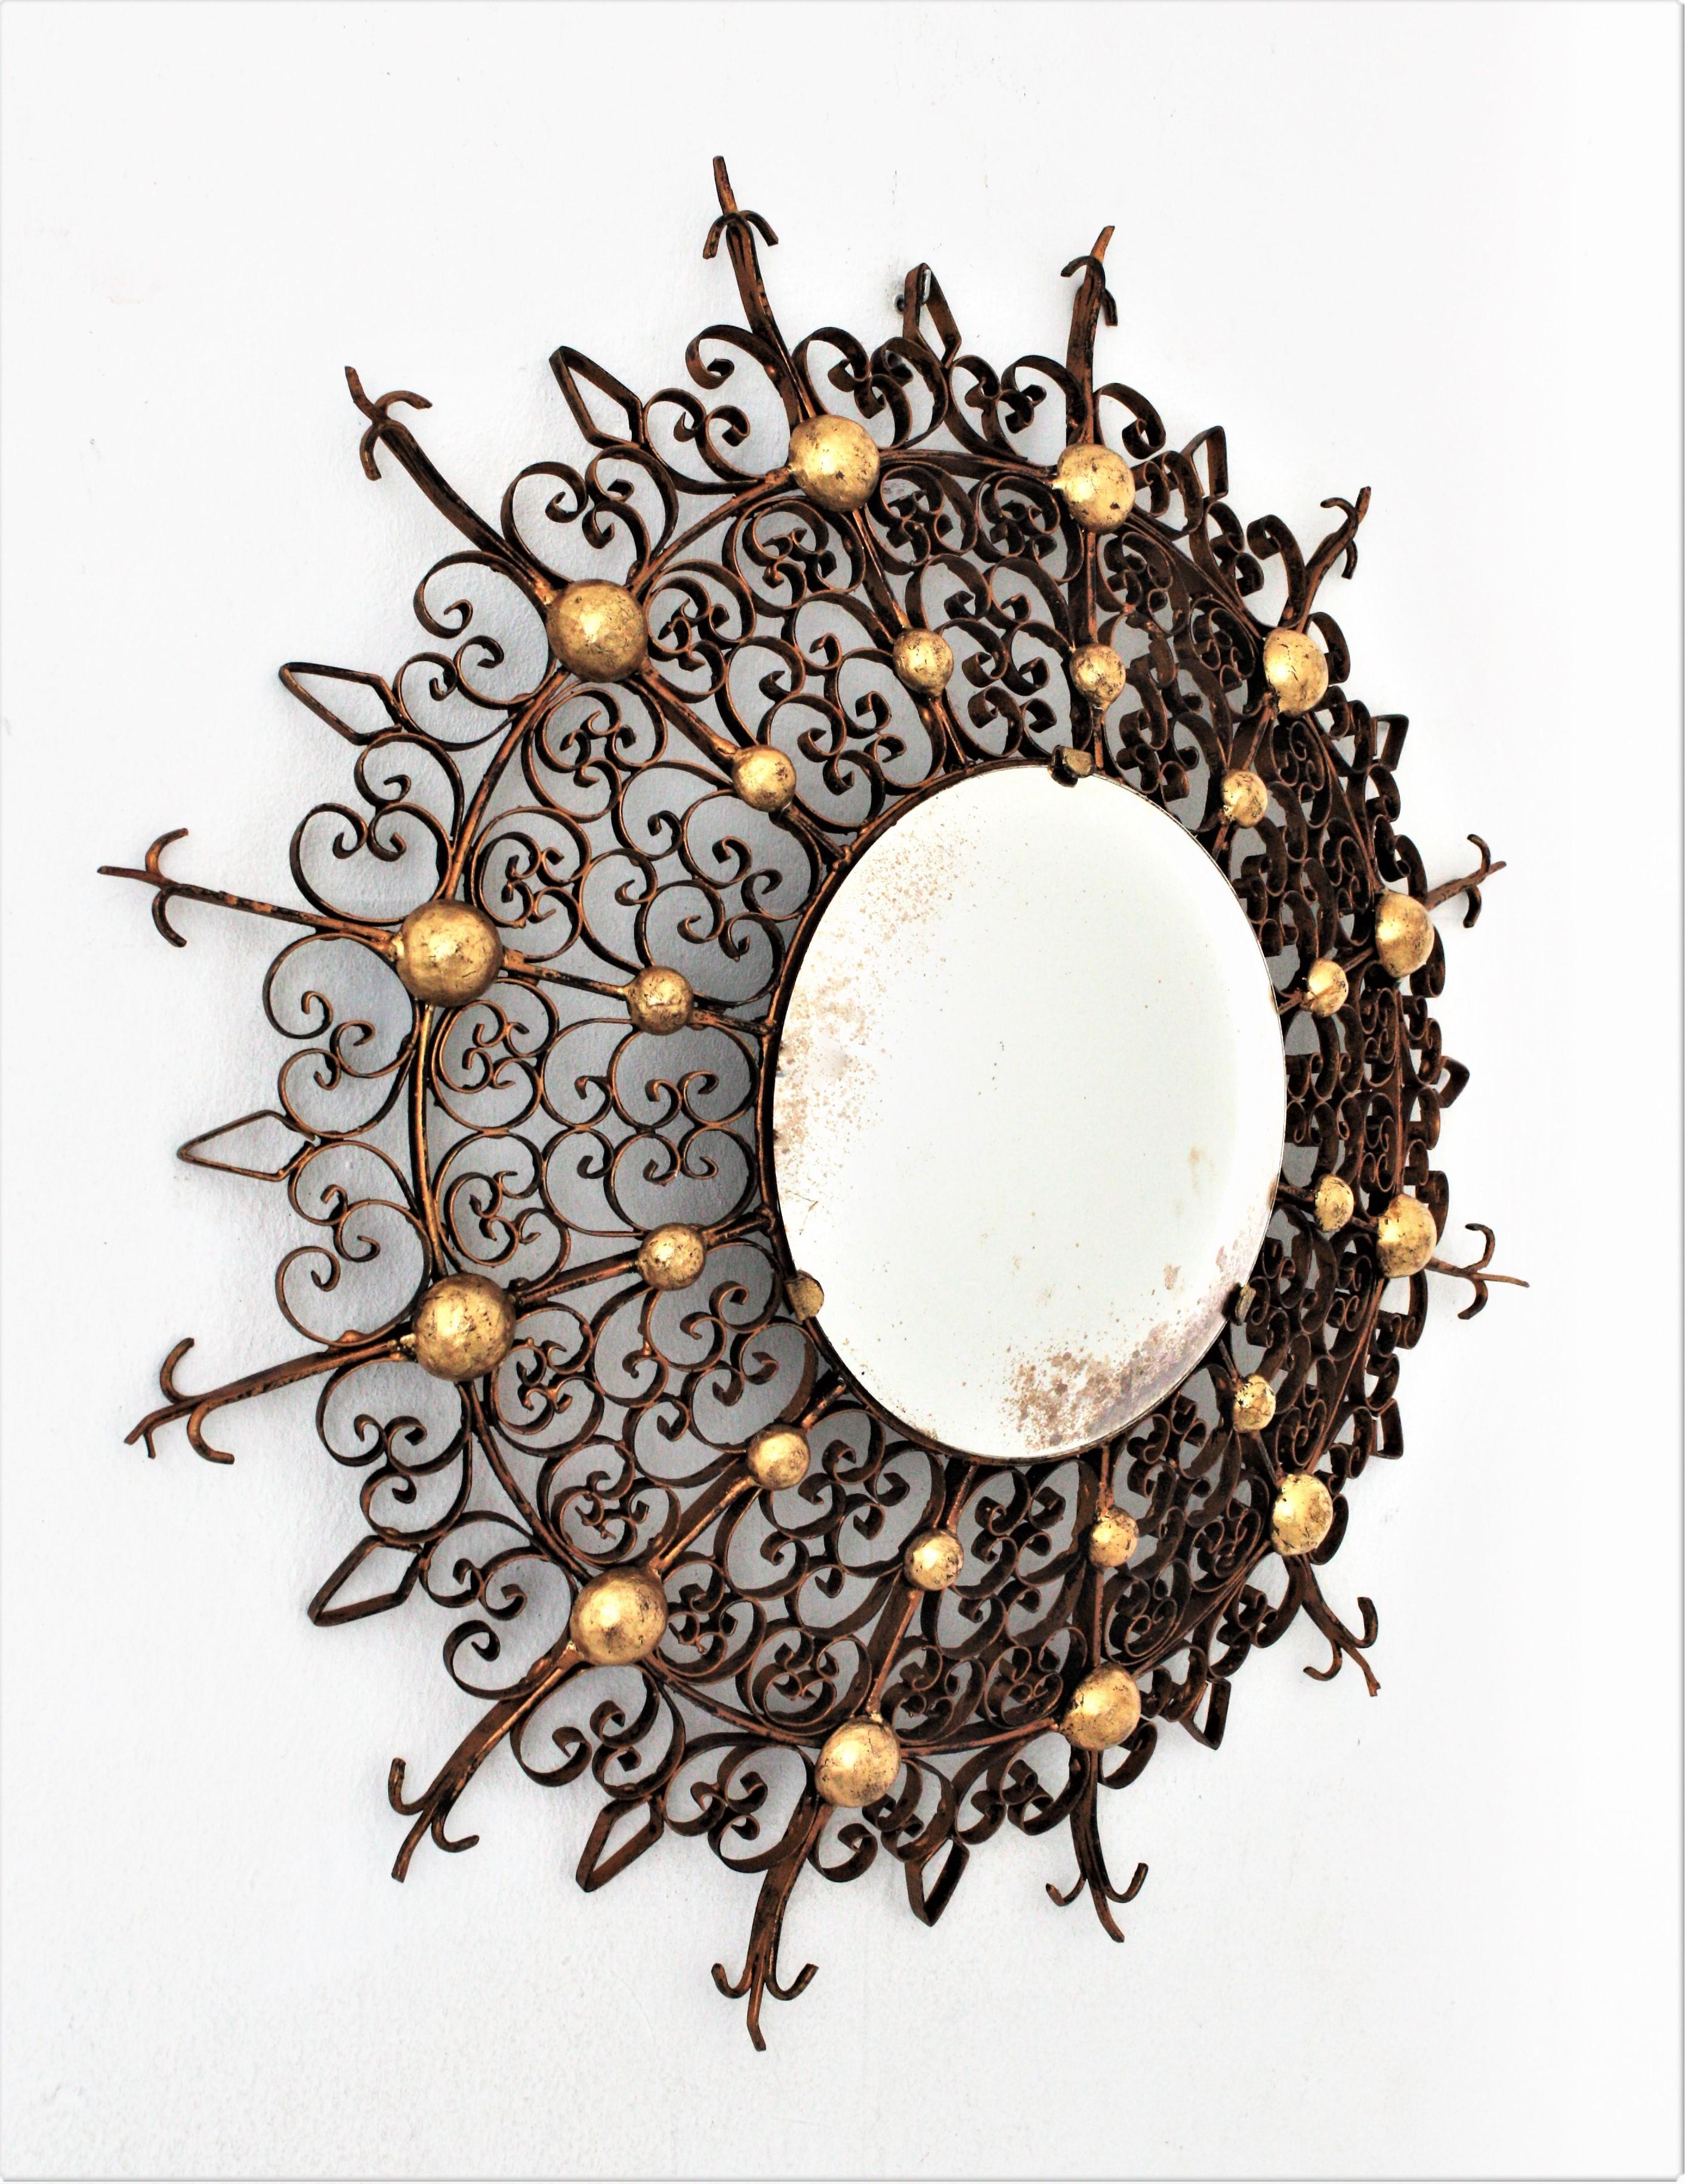 Impressive handcrafted Gothic Revival gilt iron sunburst convex mirror with scroll frame and gilt ball accents. France, 1930s-1940s.
The frame is an intricate filigree decoration with scrolls in diferent sizes accented by gold leaf gilt iron